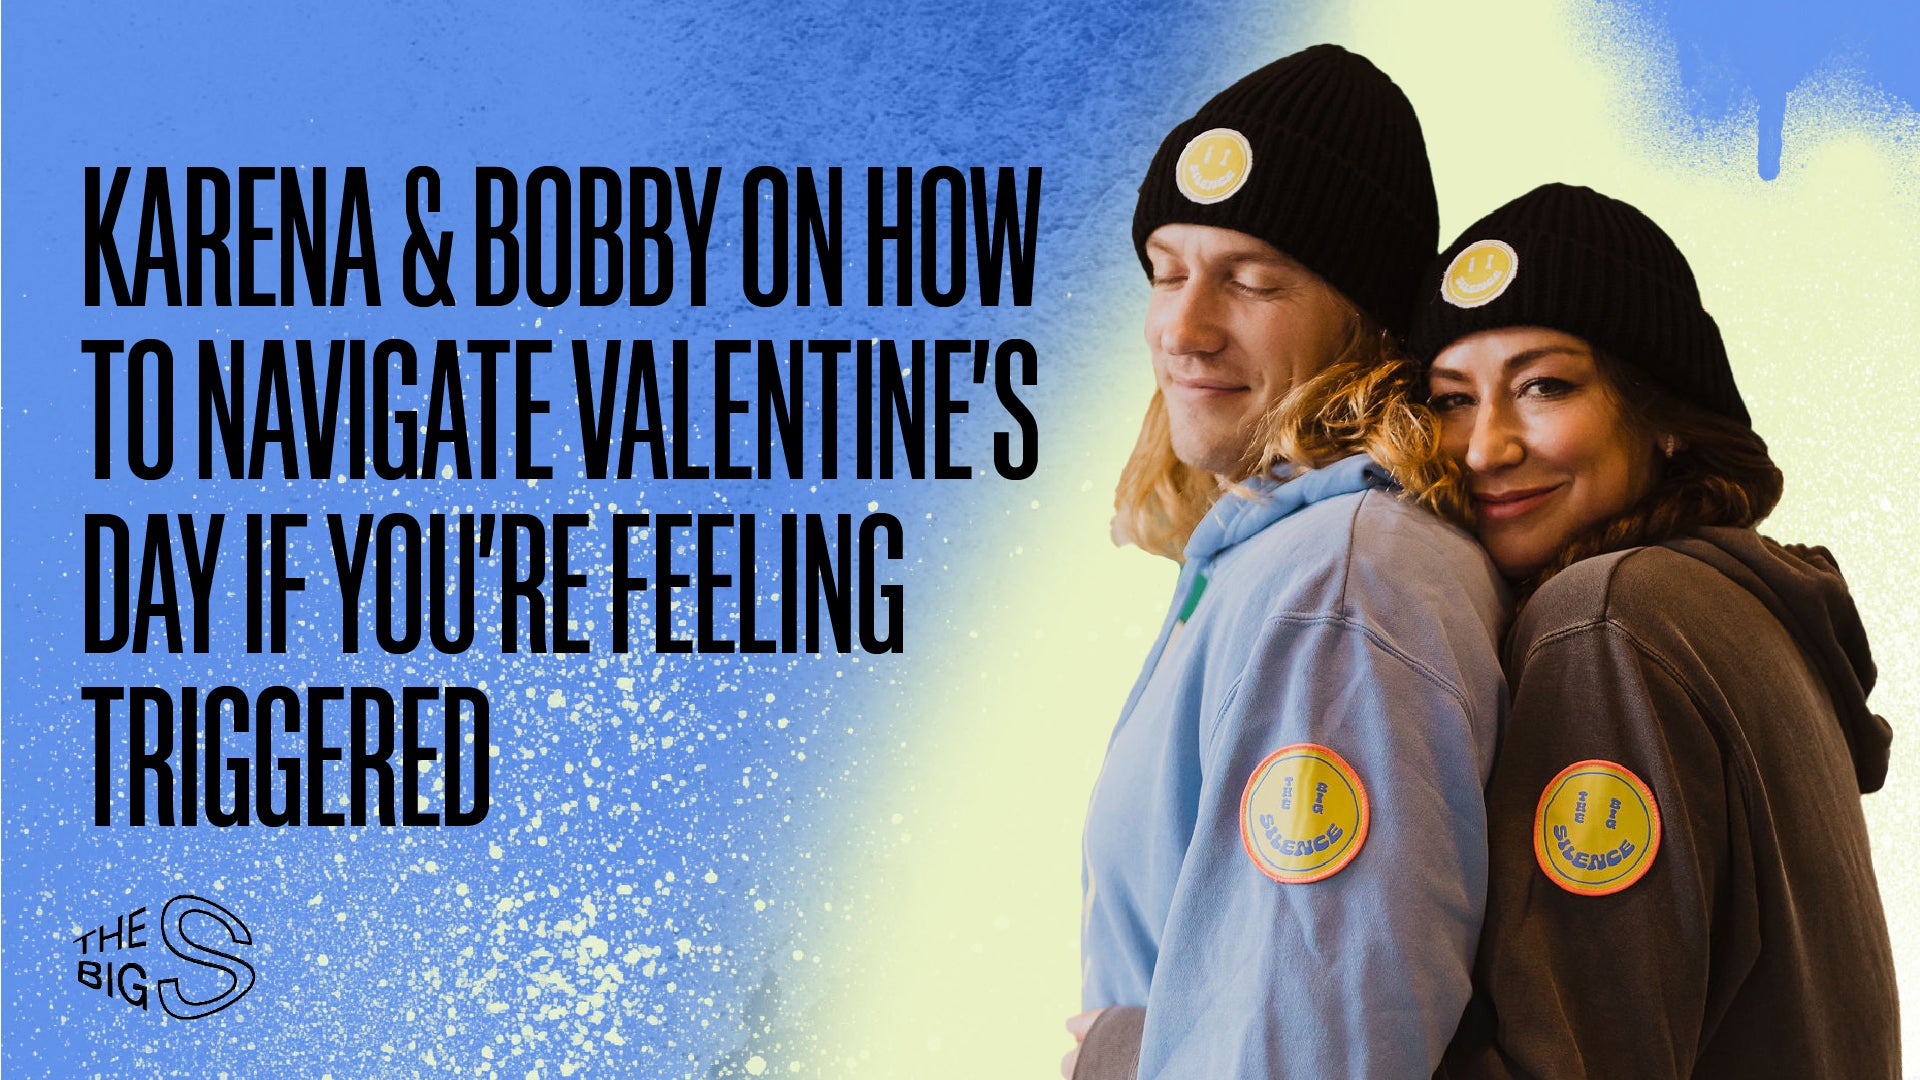 92. KARENA & BOBBY ON HOW TO NAVIGATE VALENTINE’S DAY IF YOU’RE FEELING TRIGGERED